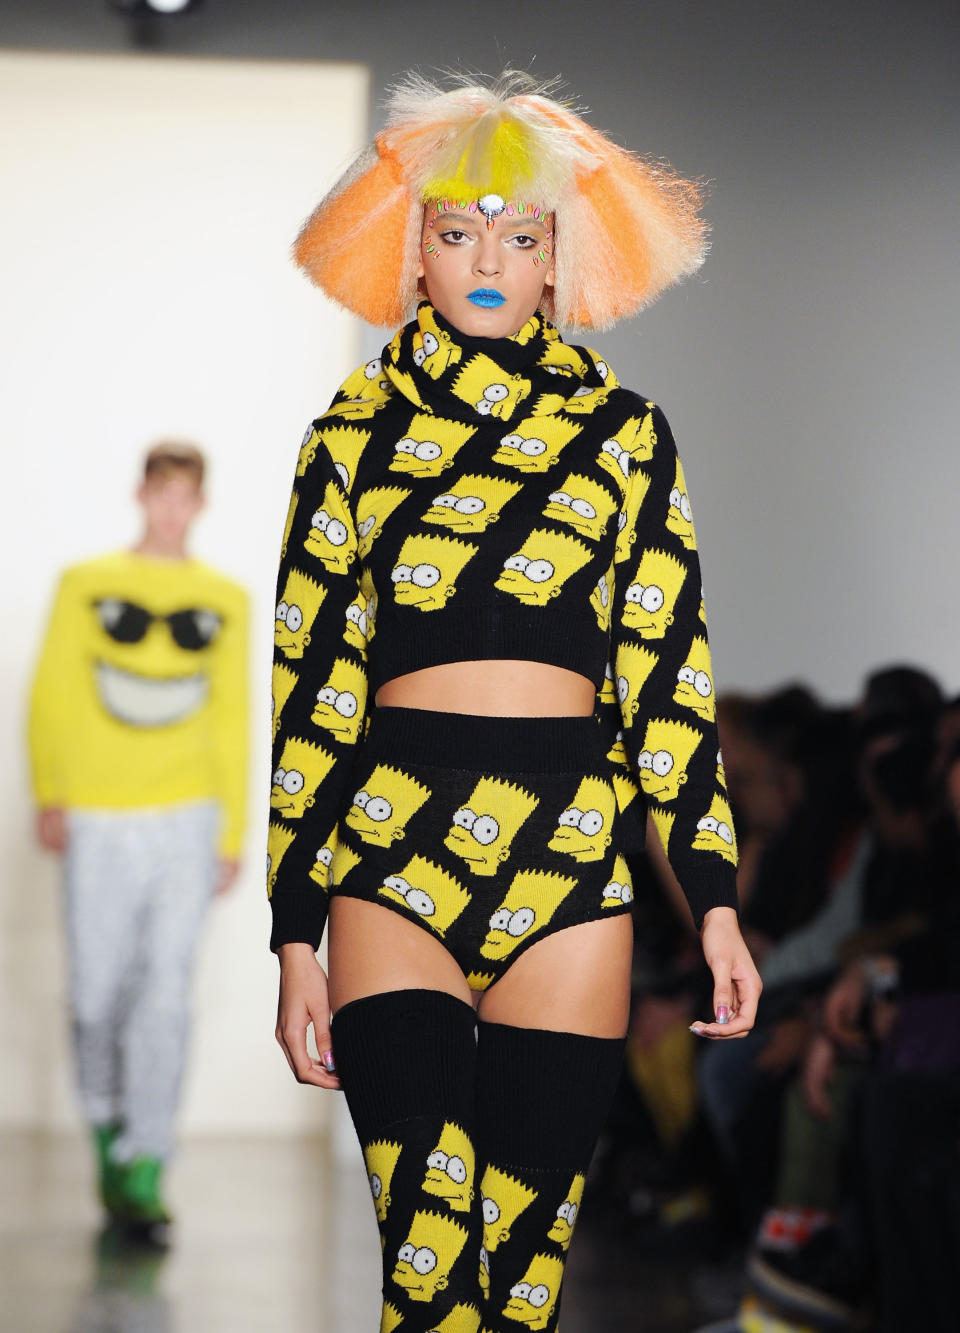 <p>Speaking of yellow cartoon characters, Jeremy Scott was catapulted into the limelight in 2012 after he created an autumn collection covered in ‘The Simpsons’.<em> [Photo: Getty]</em> </p>